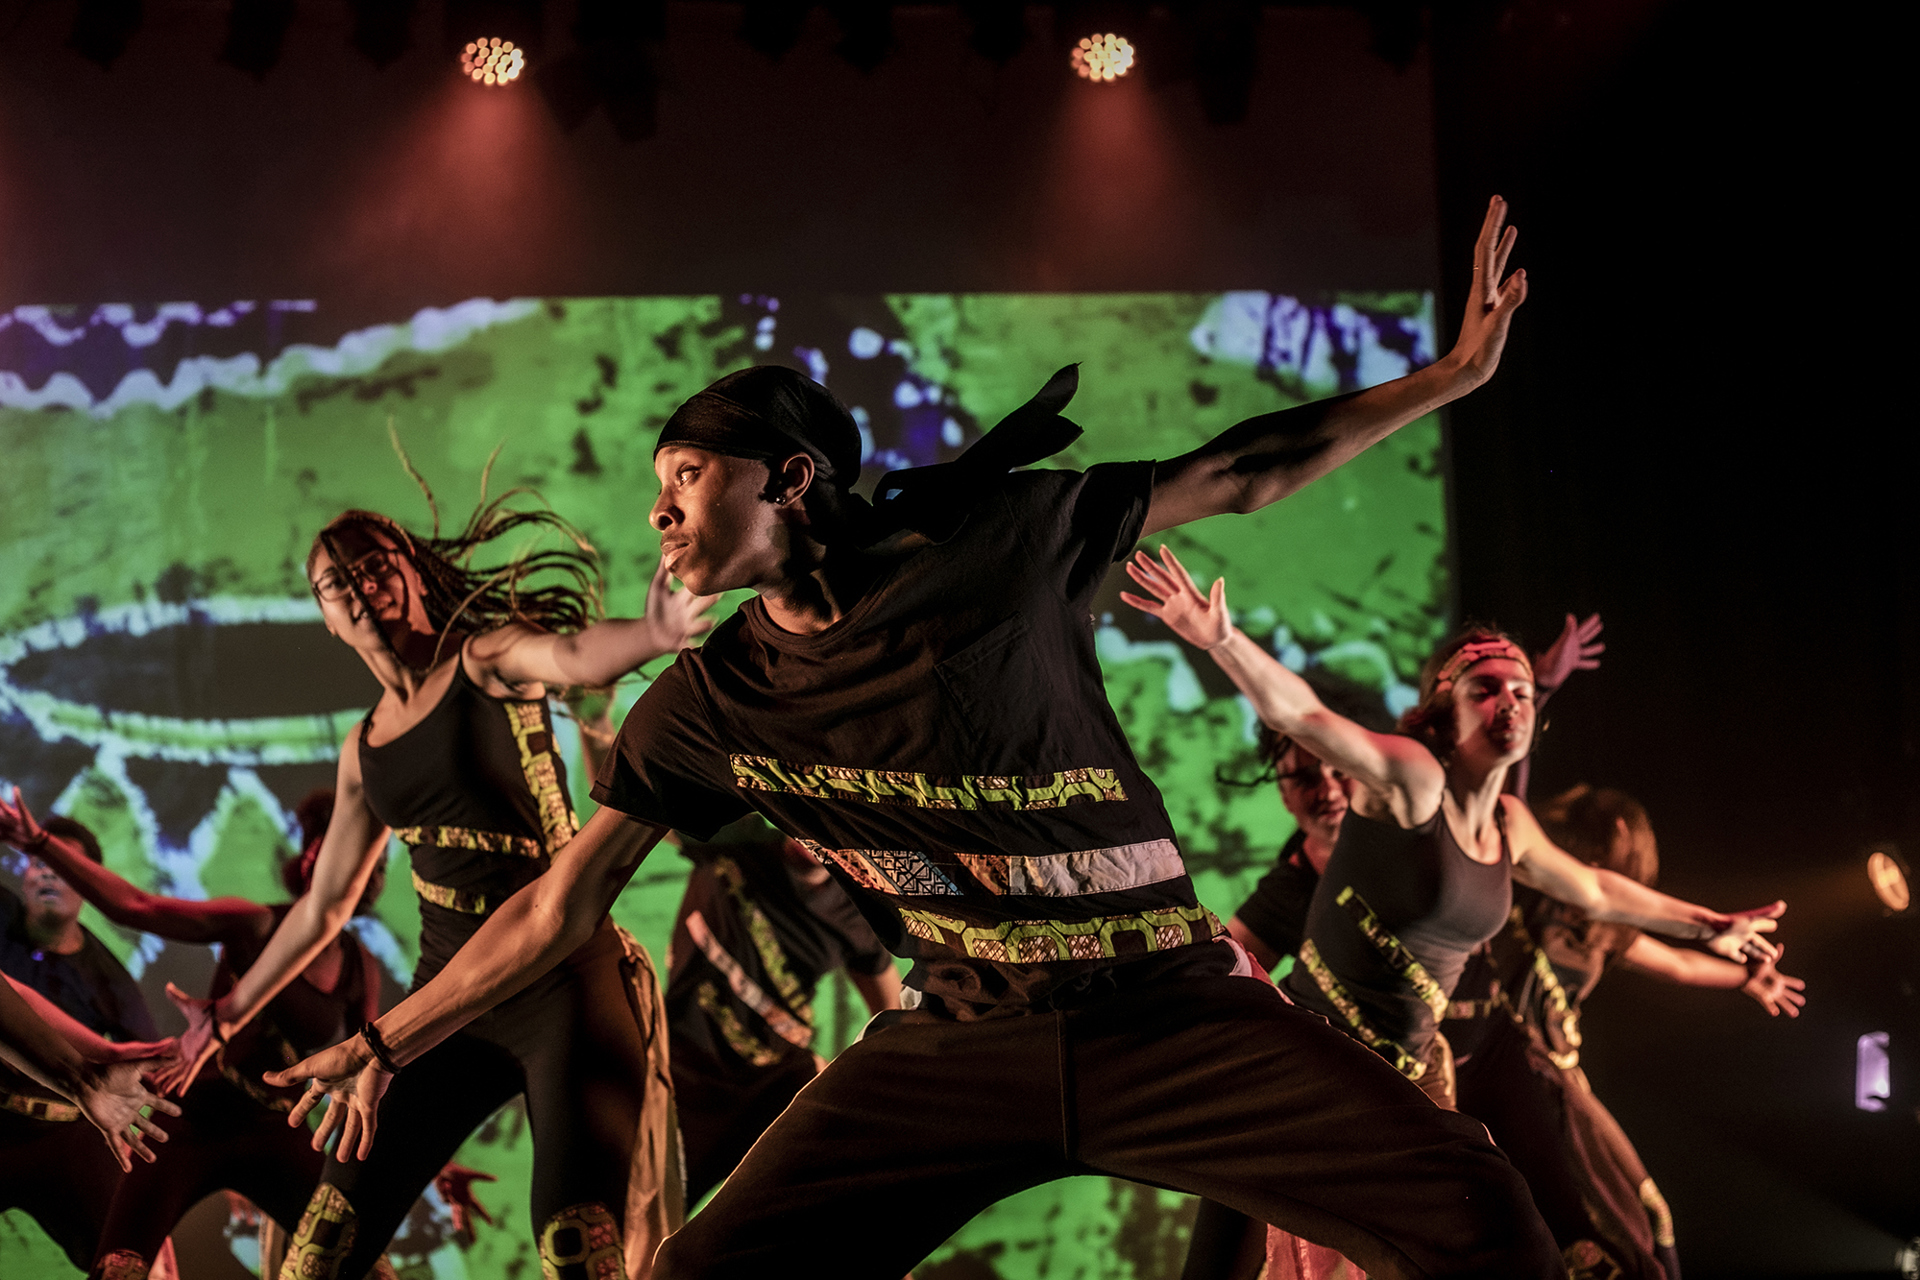 young people performing on udance stage. Main focus is on black male dancer arms stretched diagonally and looking to the left wearing black with camo striped and a black durag. Backdrop is green patterns with red lights 